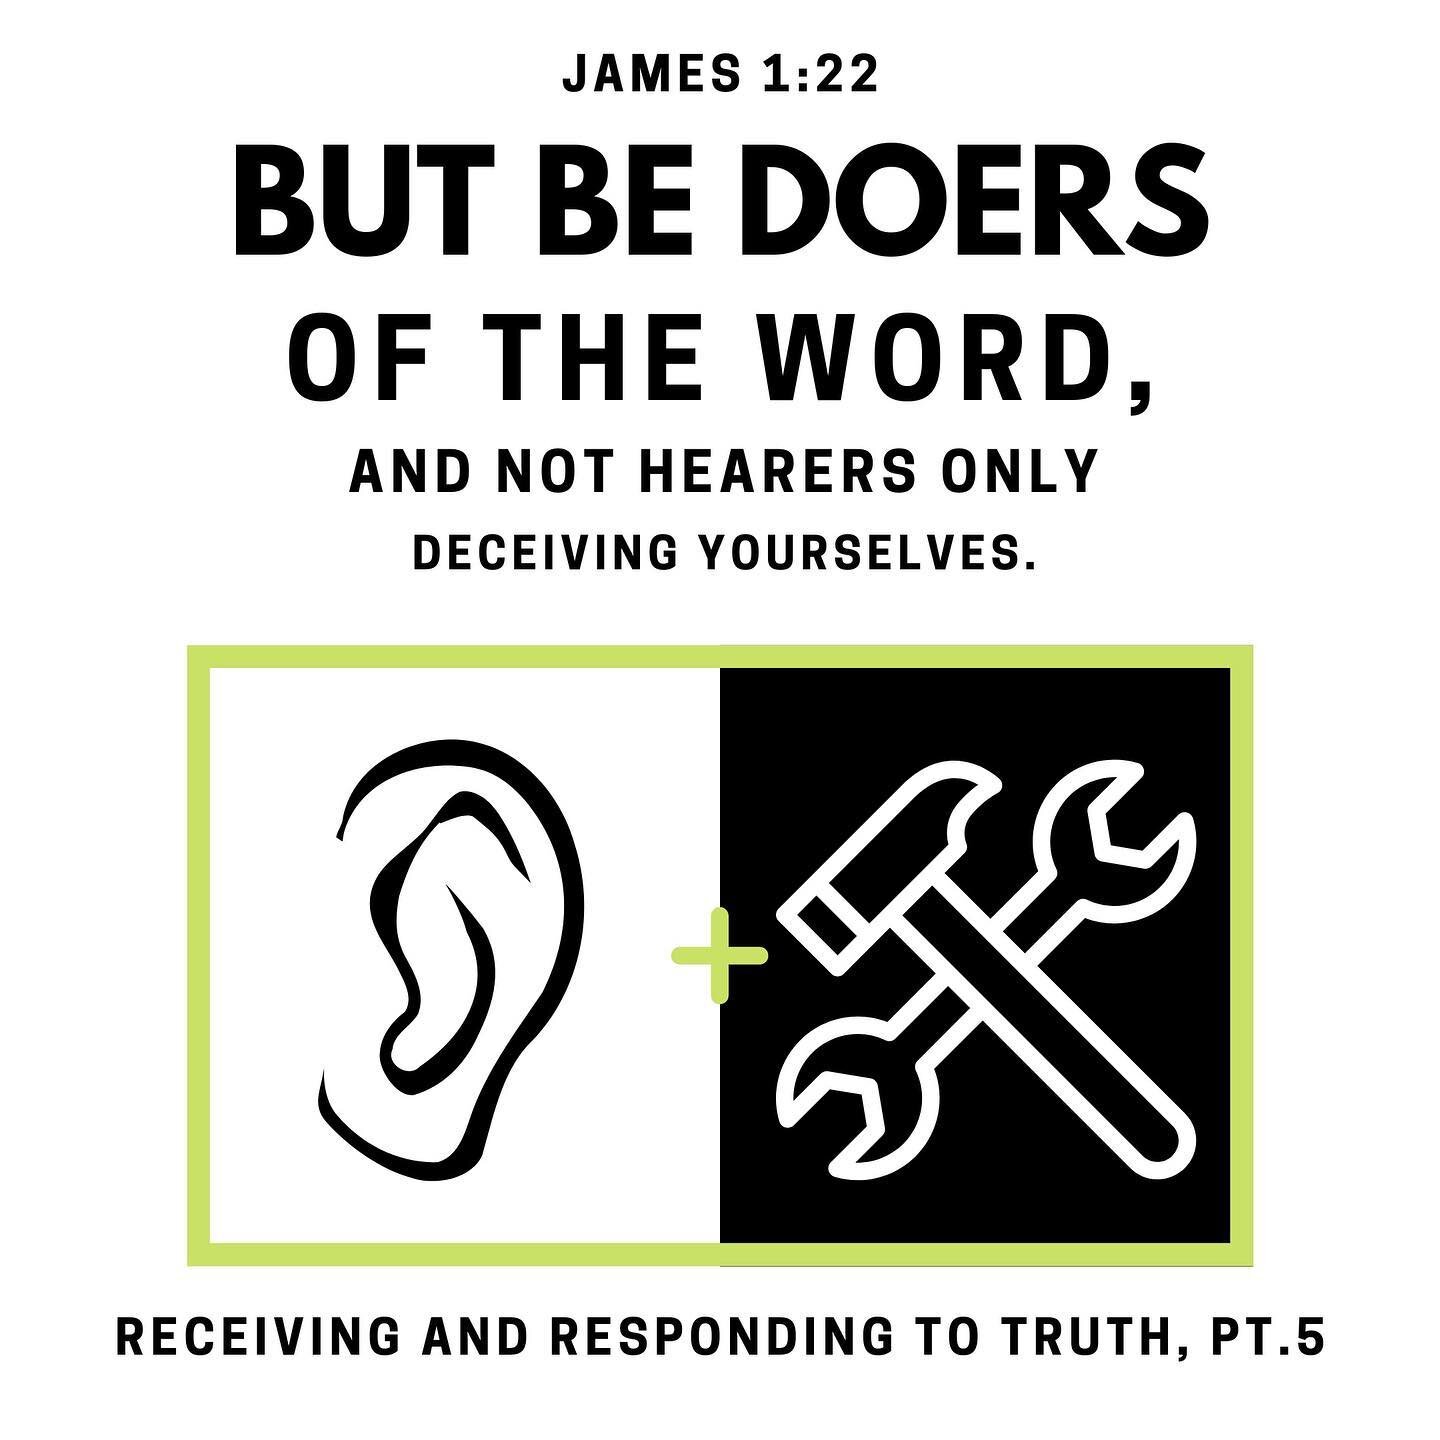 &ldquo;Receiving and Responding to Truth, pt.5&rdquo;
YouTube: https://youtu.be/andW1QjdeI4